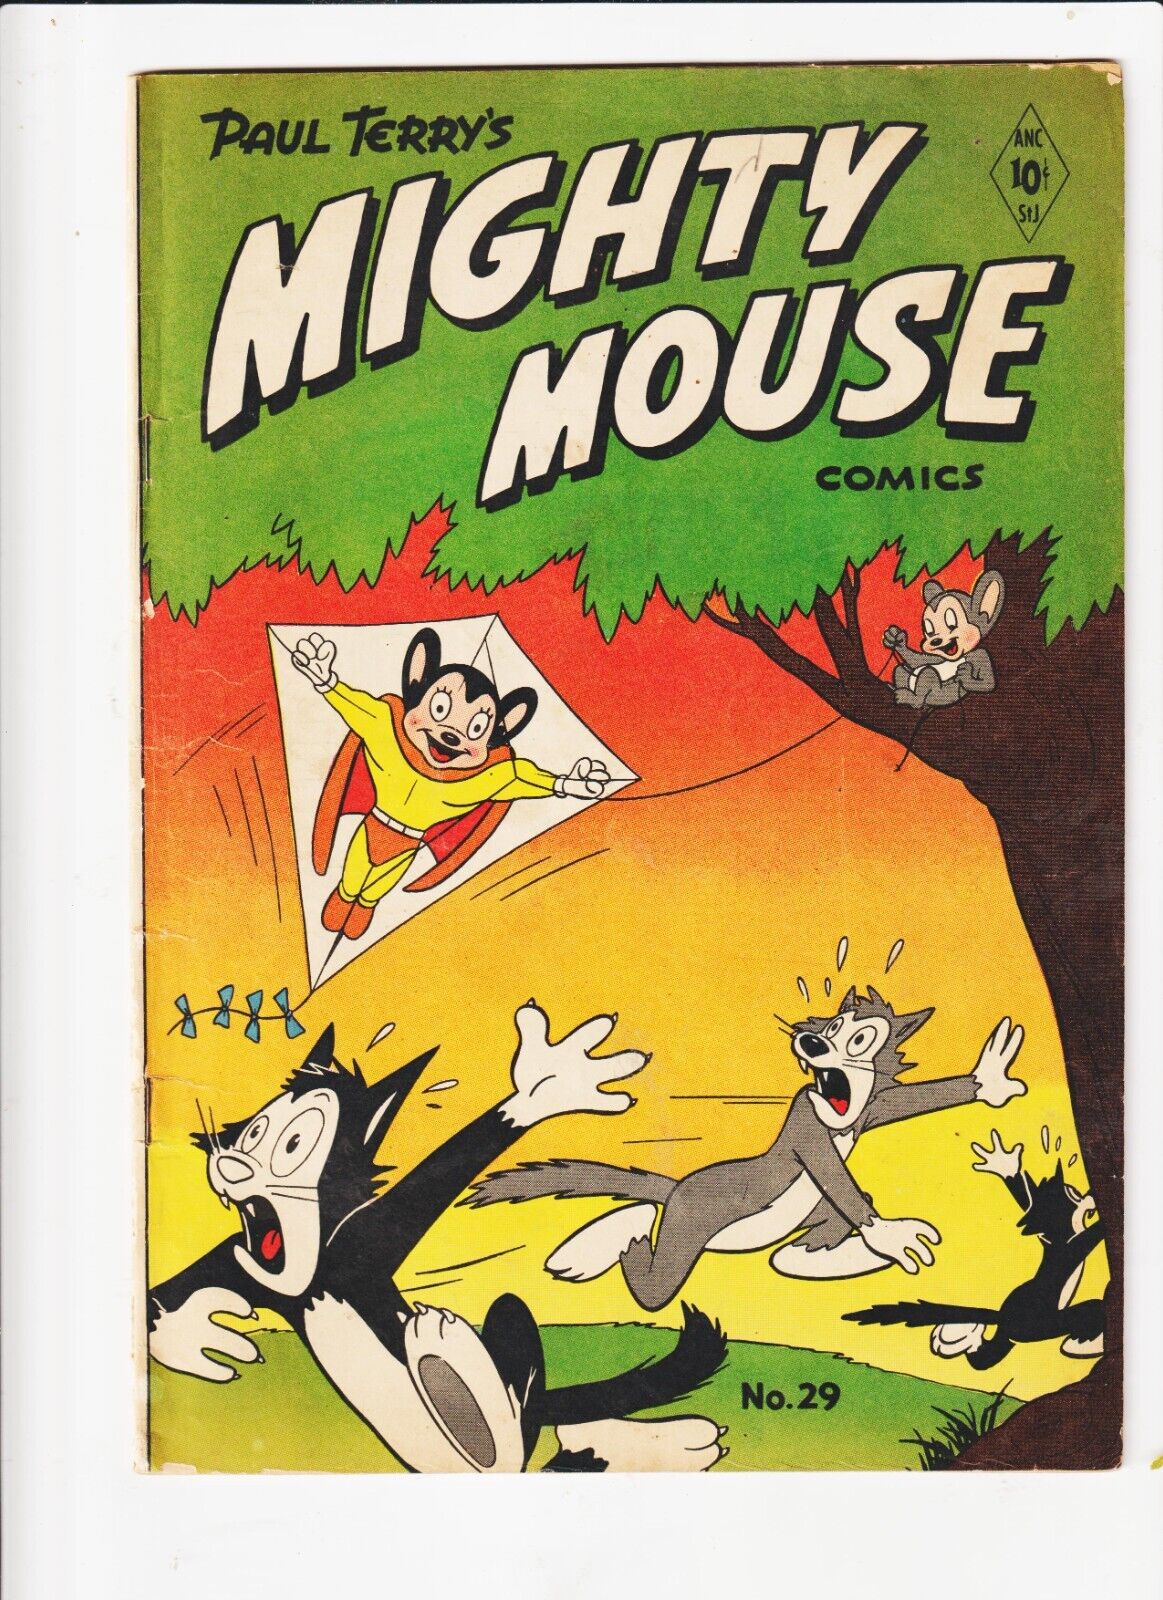 PAUL TERRY'S MIGHTY MOUSE COMICS  #29 ST. JOHN 1951 GOLDEN AGE HECKLE & JECKLE